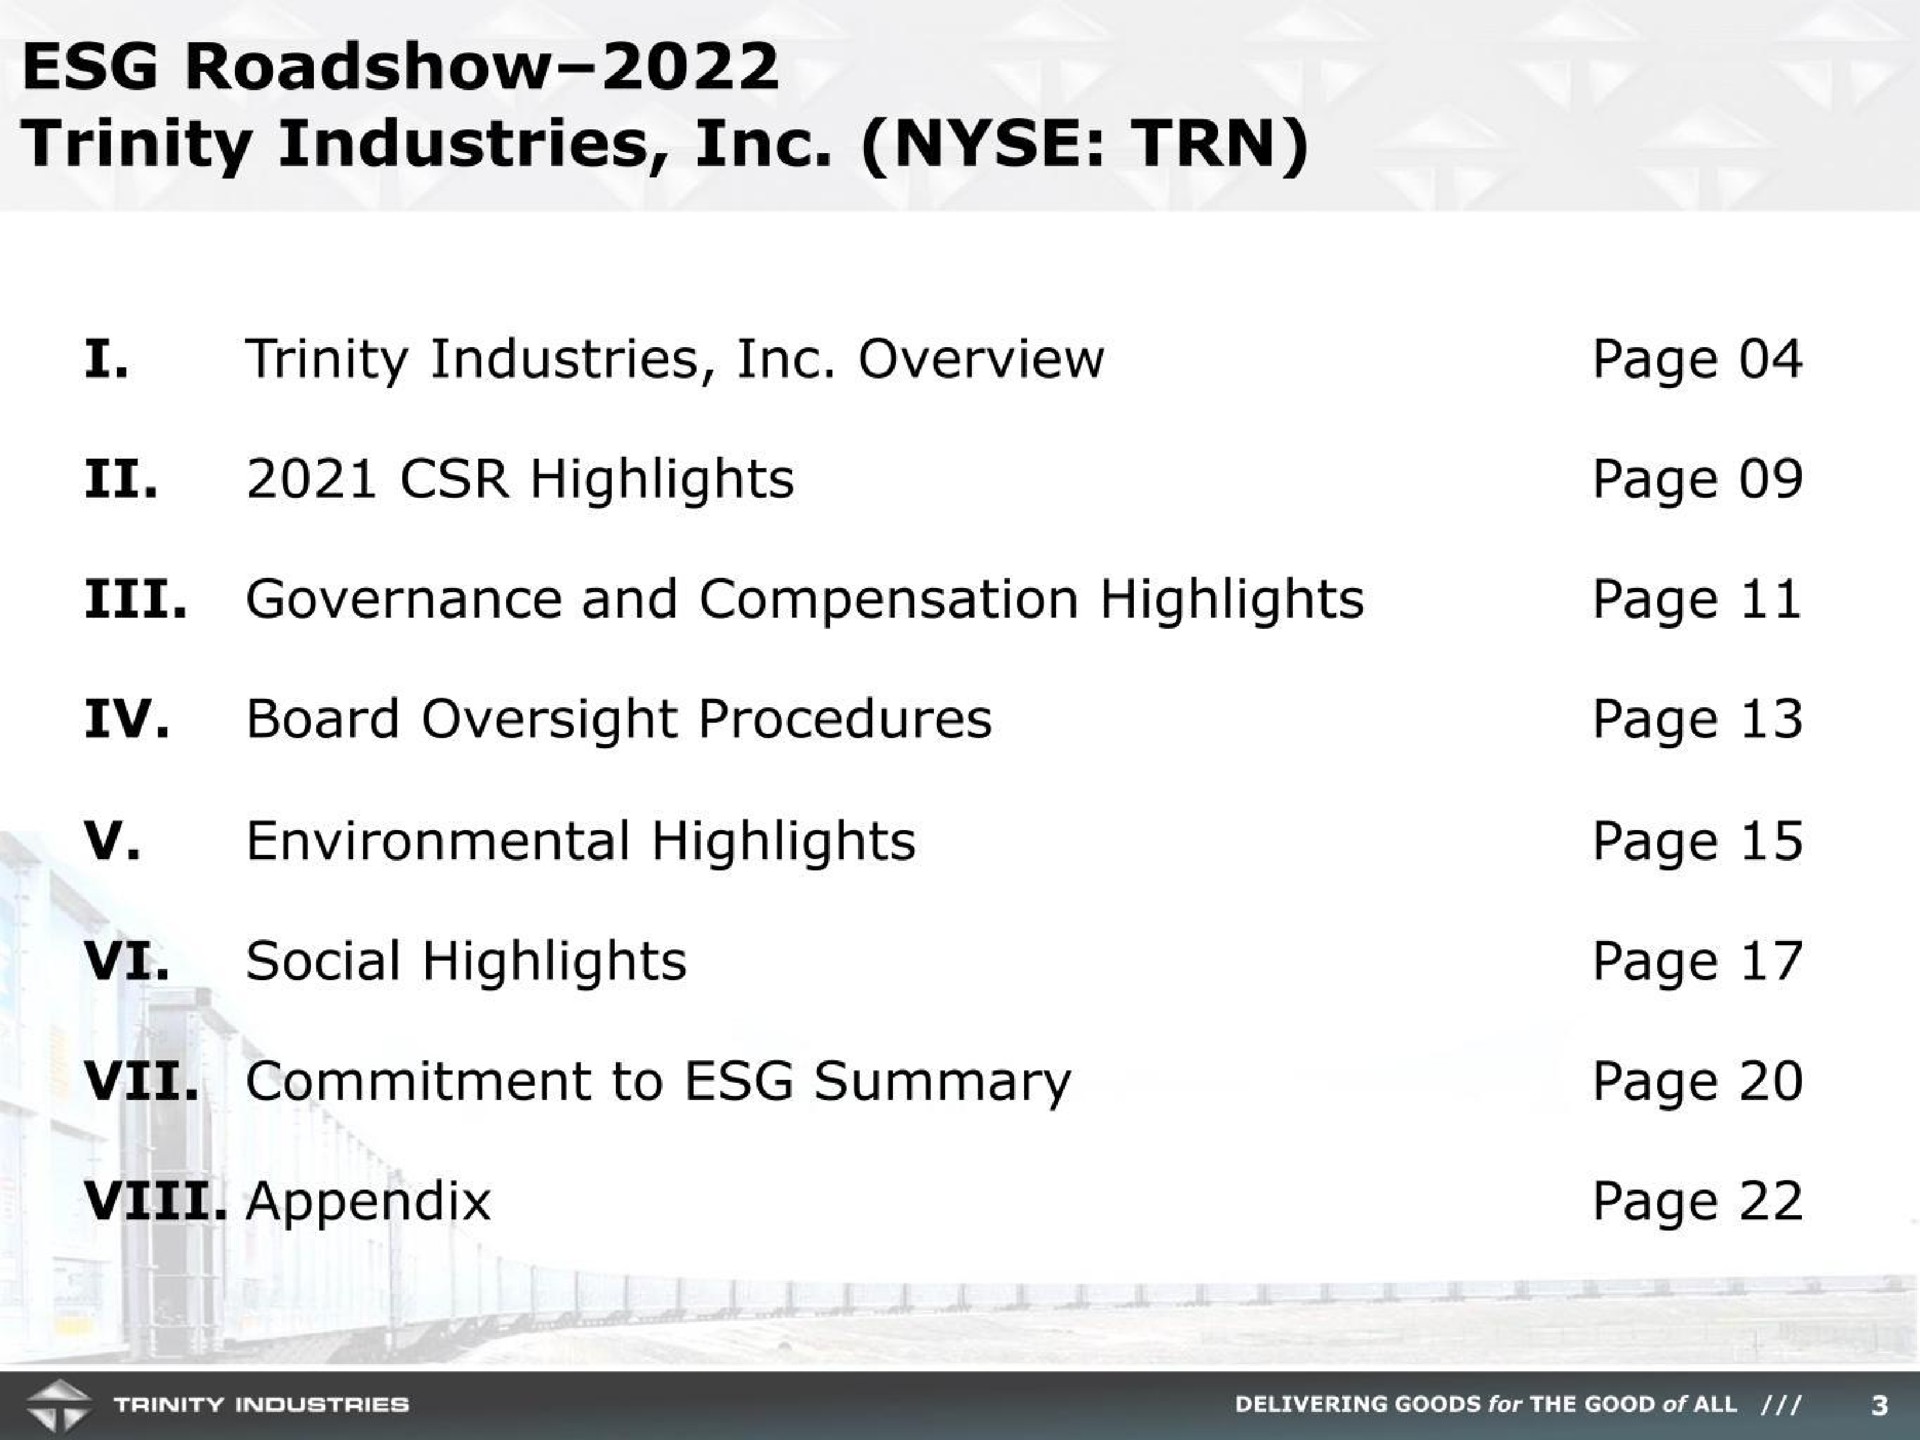 trinity industries i trinity industries overview highlights page page governance and compensation highlights page board oversight procedures environmental highlights social highlights commitment to summary appendix page page page page page | Trinity Industries